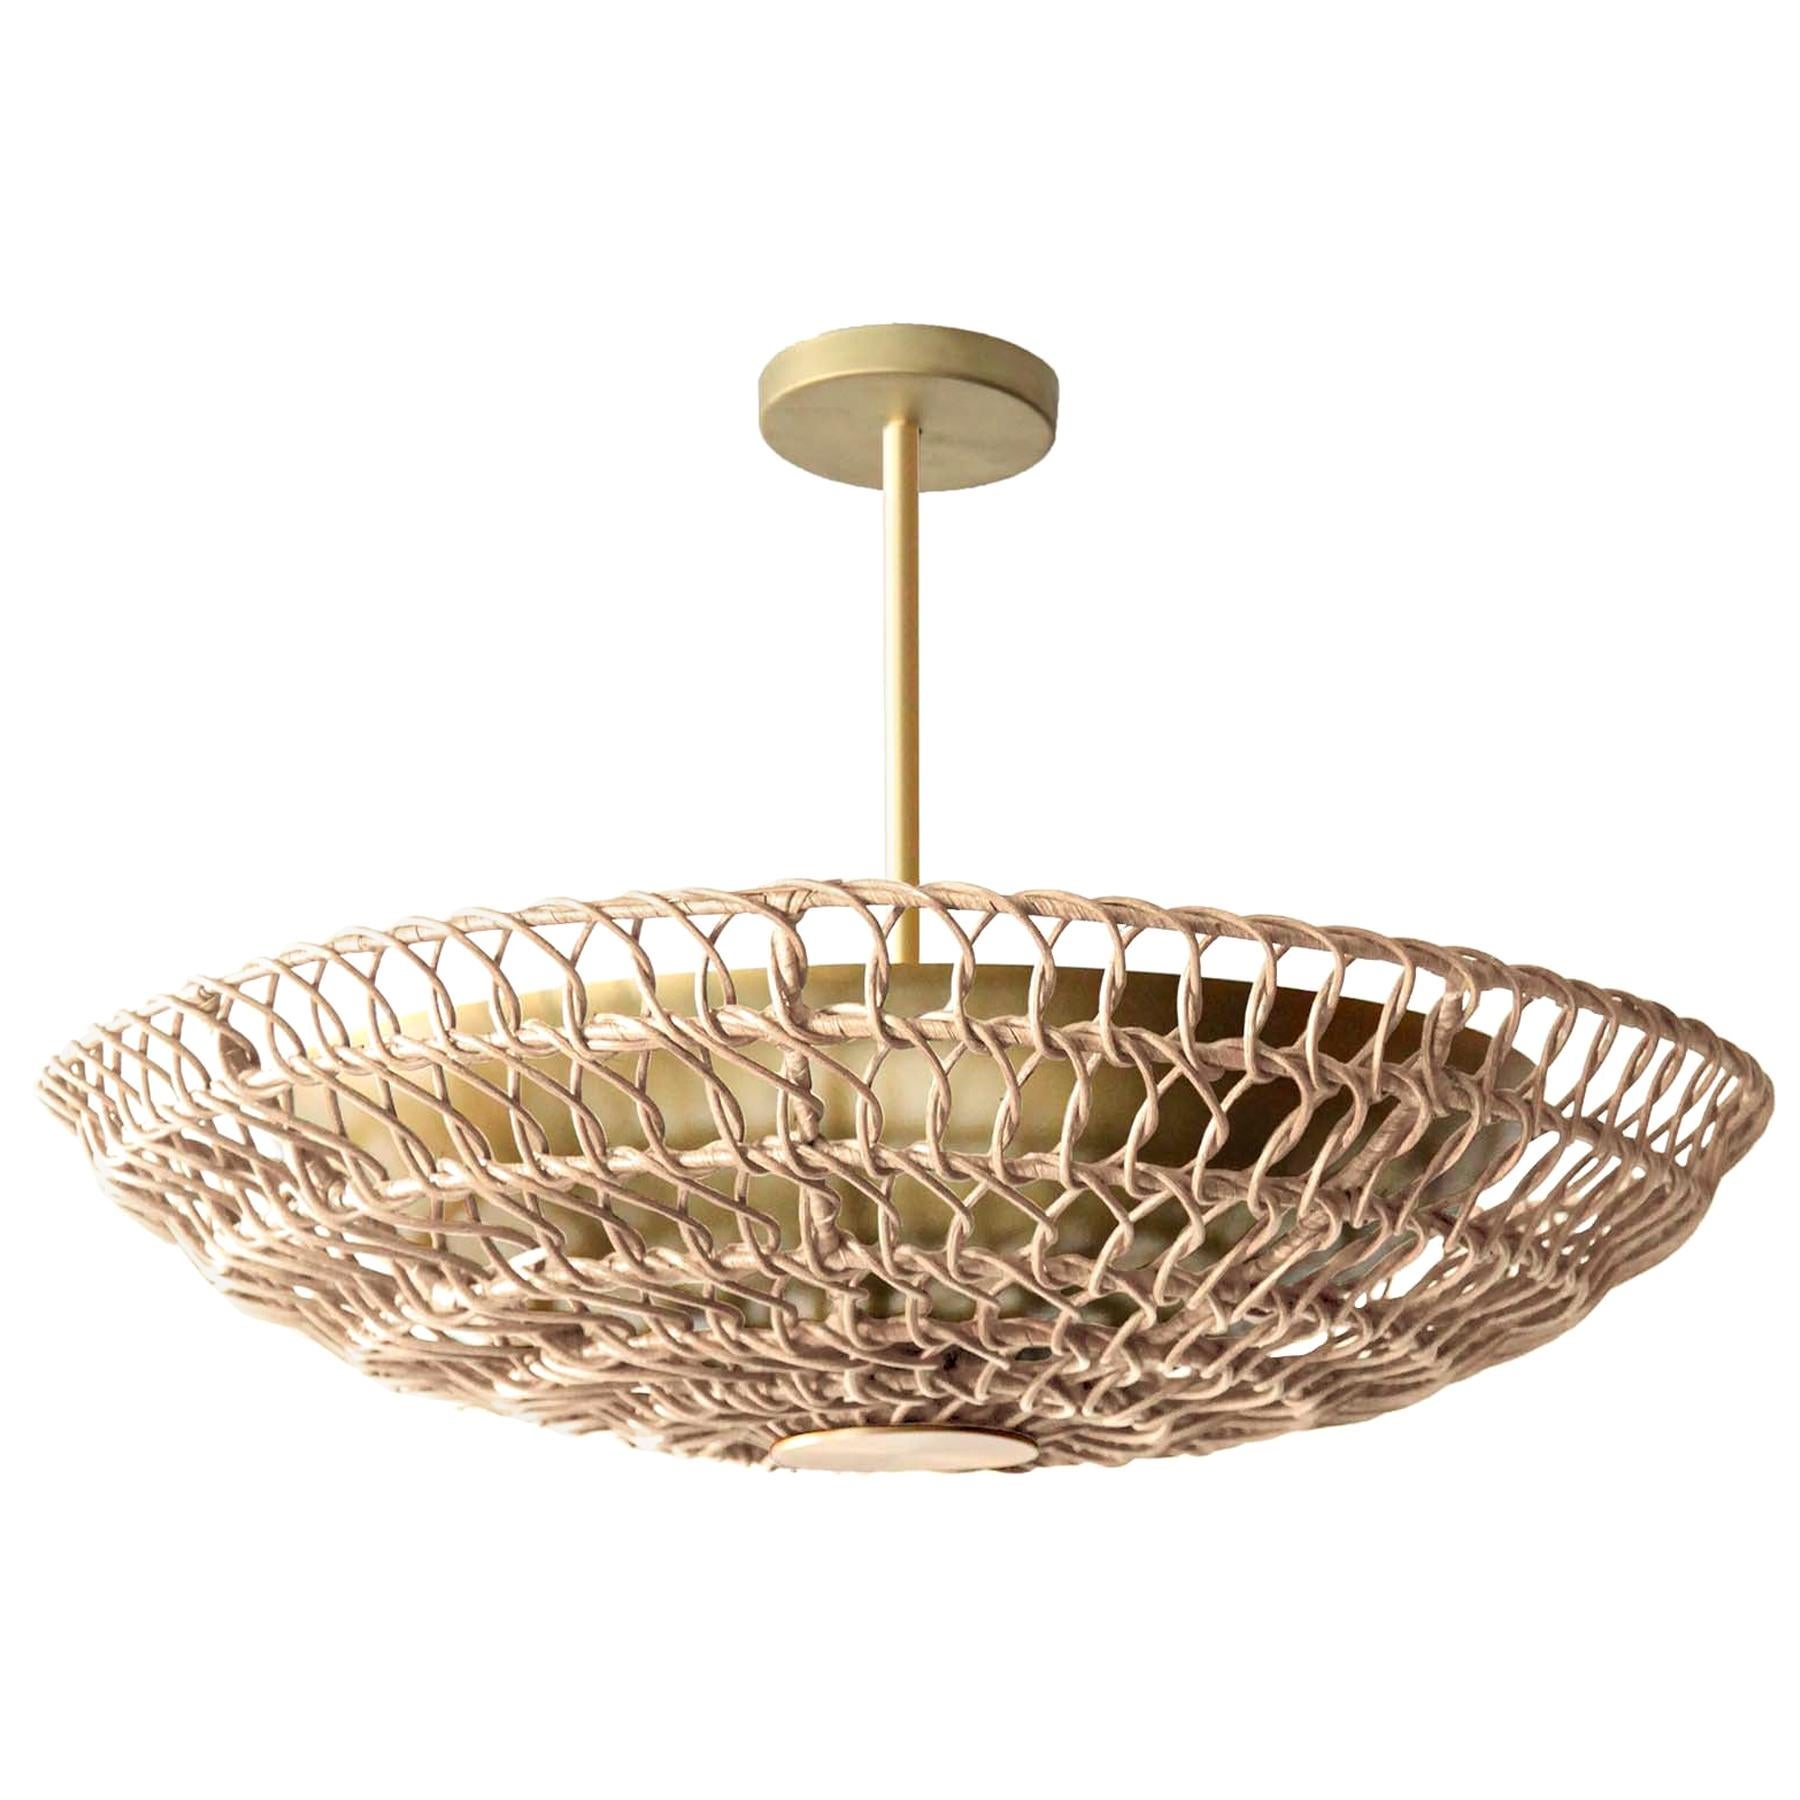 24" Pendant Light in Handwoven Natural Rattan, Ventila Collection For Sale